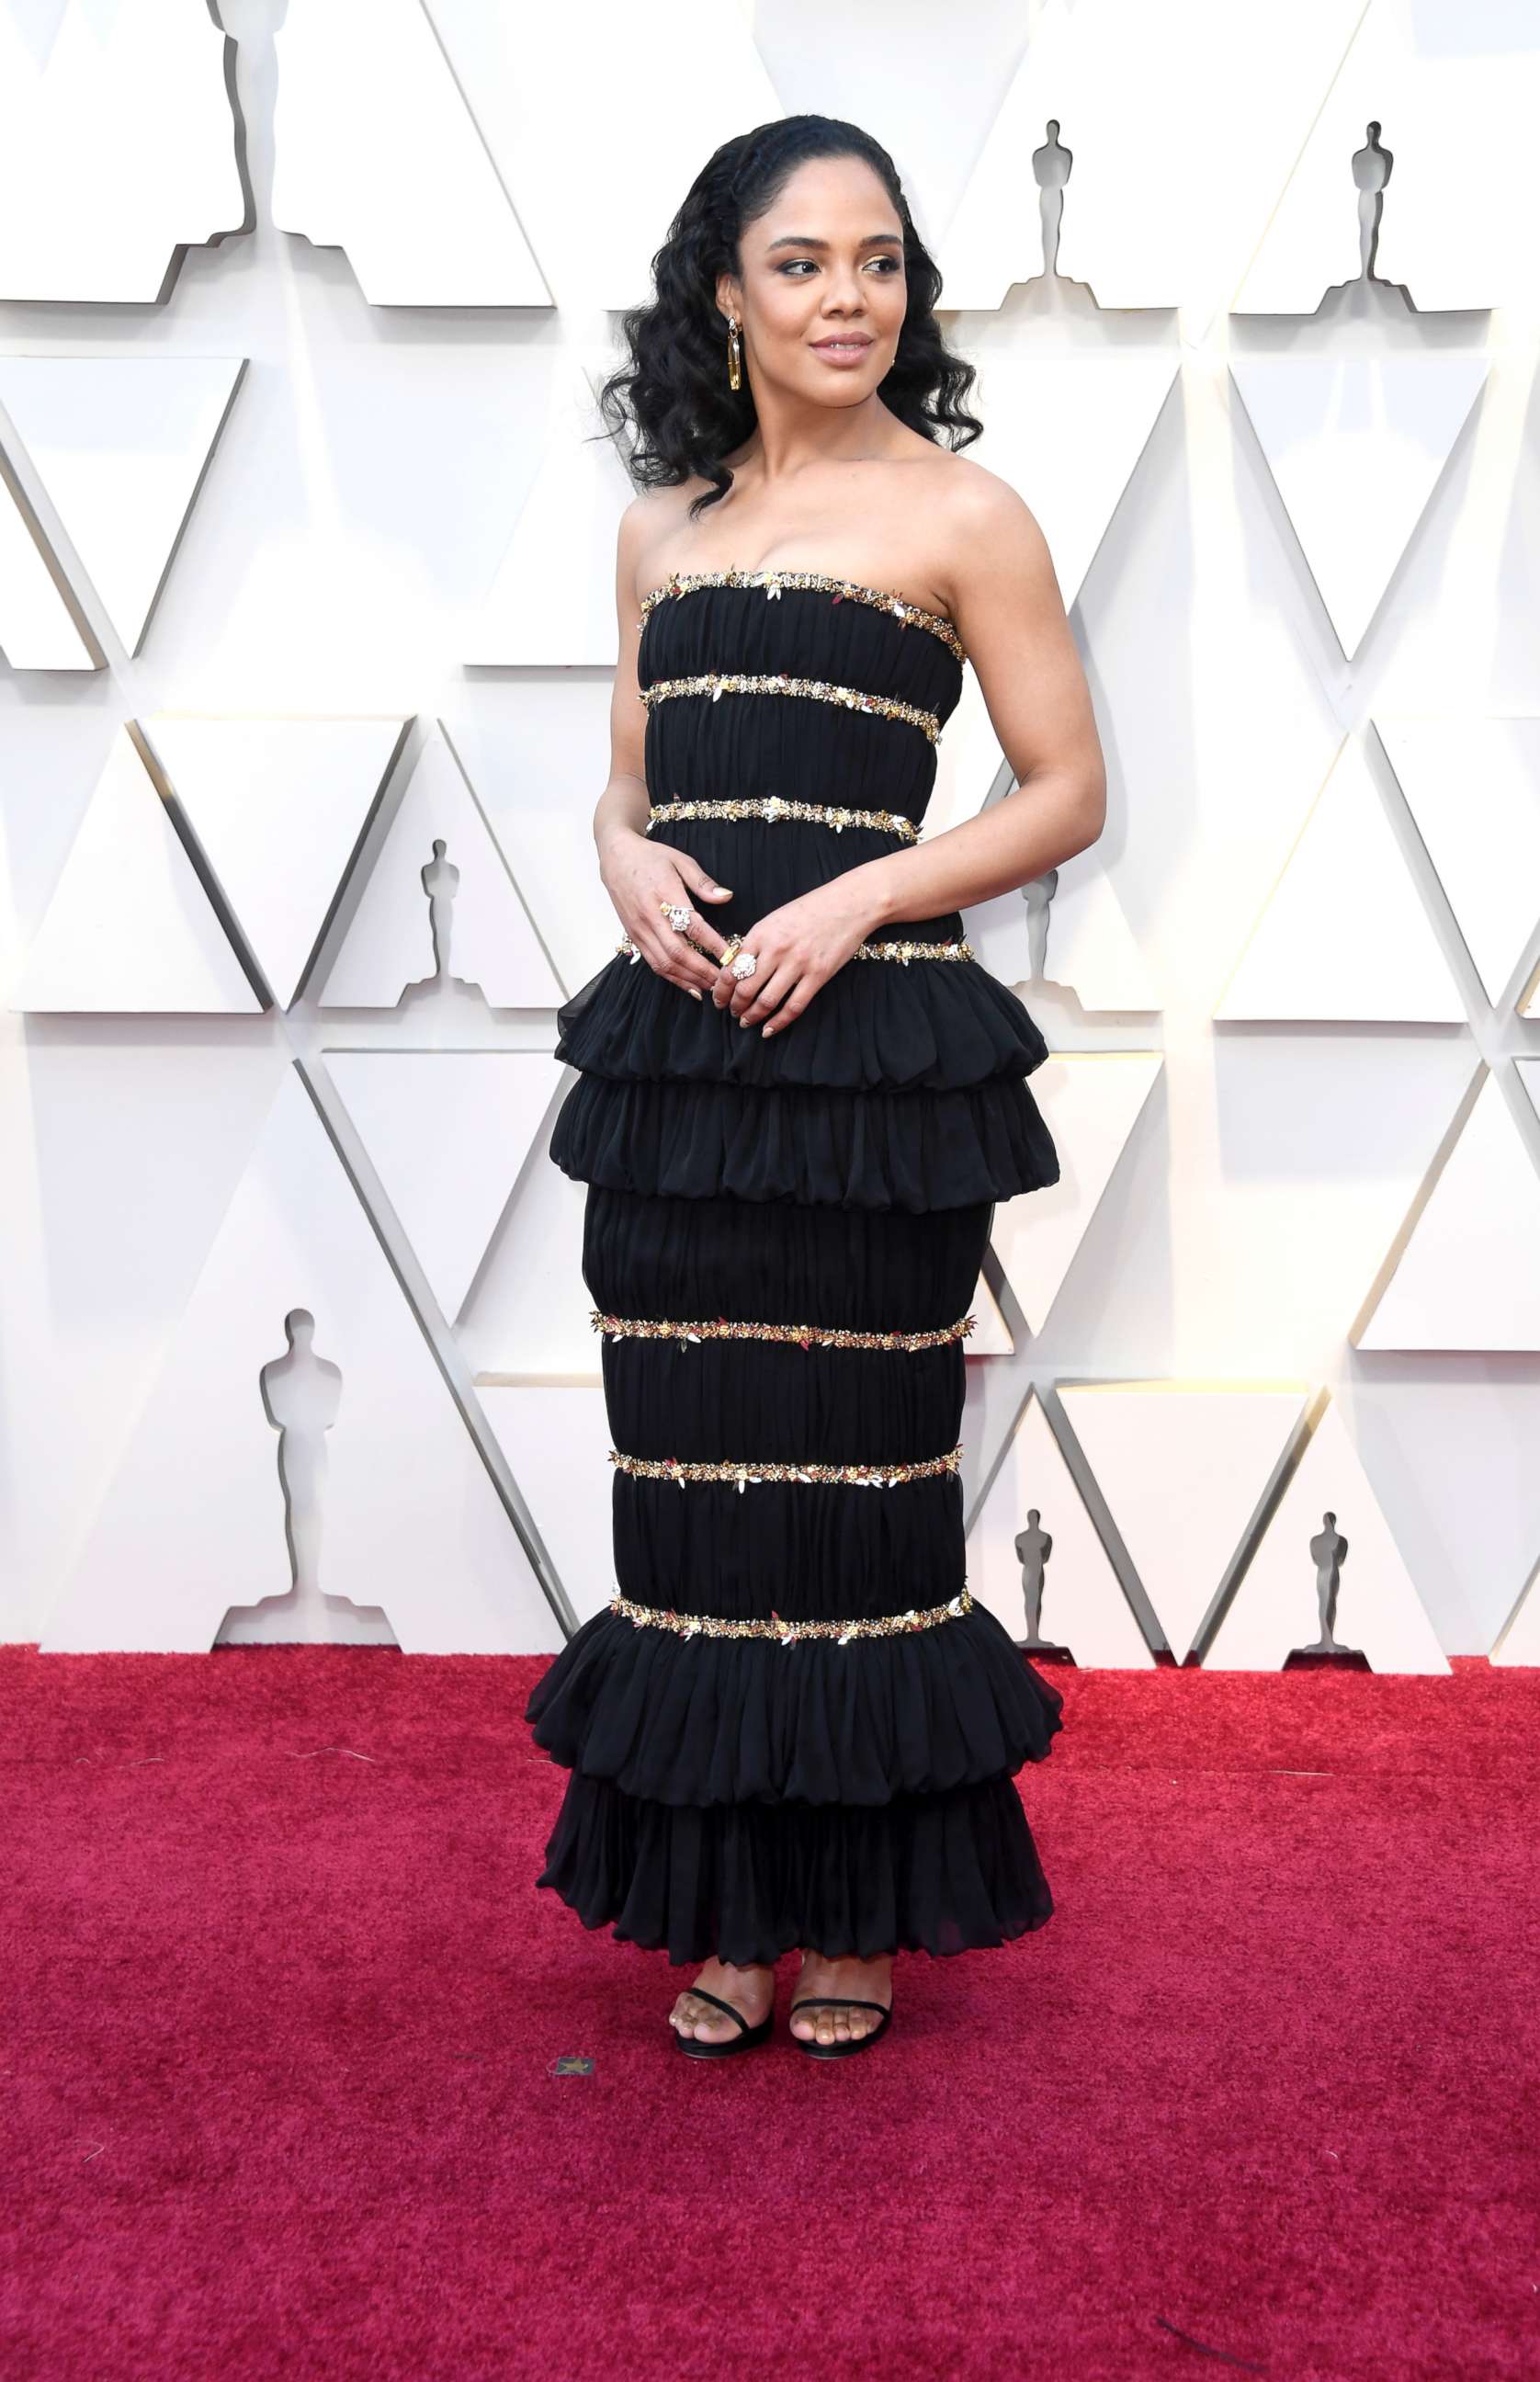 PHOTO: Tessa Thompson attends the 91st Annual Academy Awards, Feb. 24, 2019 in Hollywood, Calif.